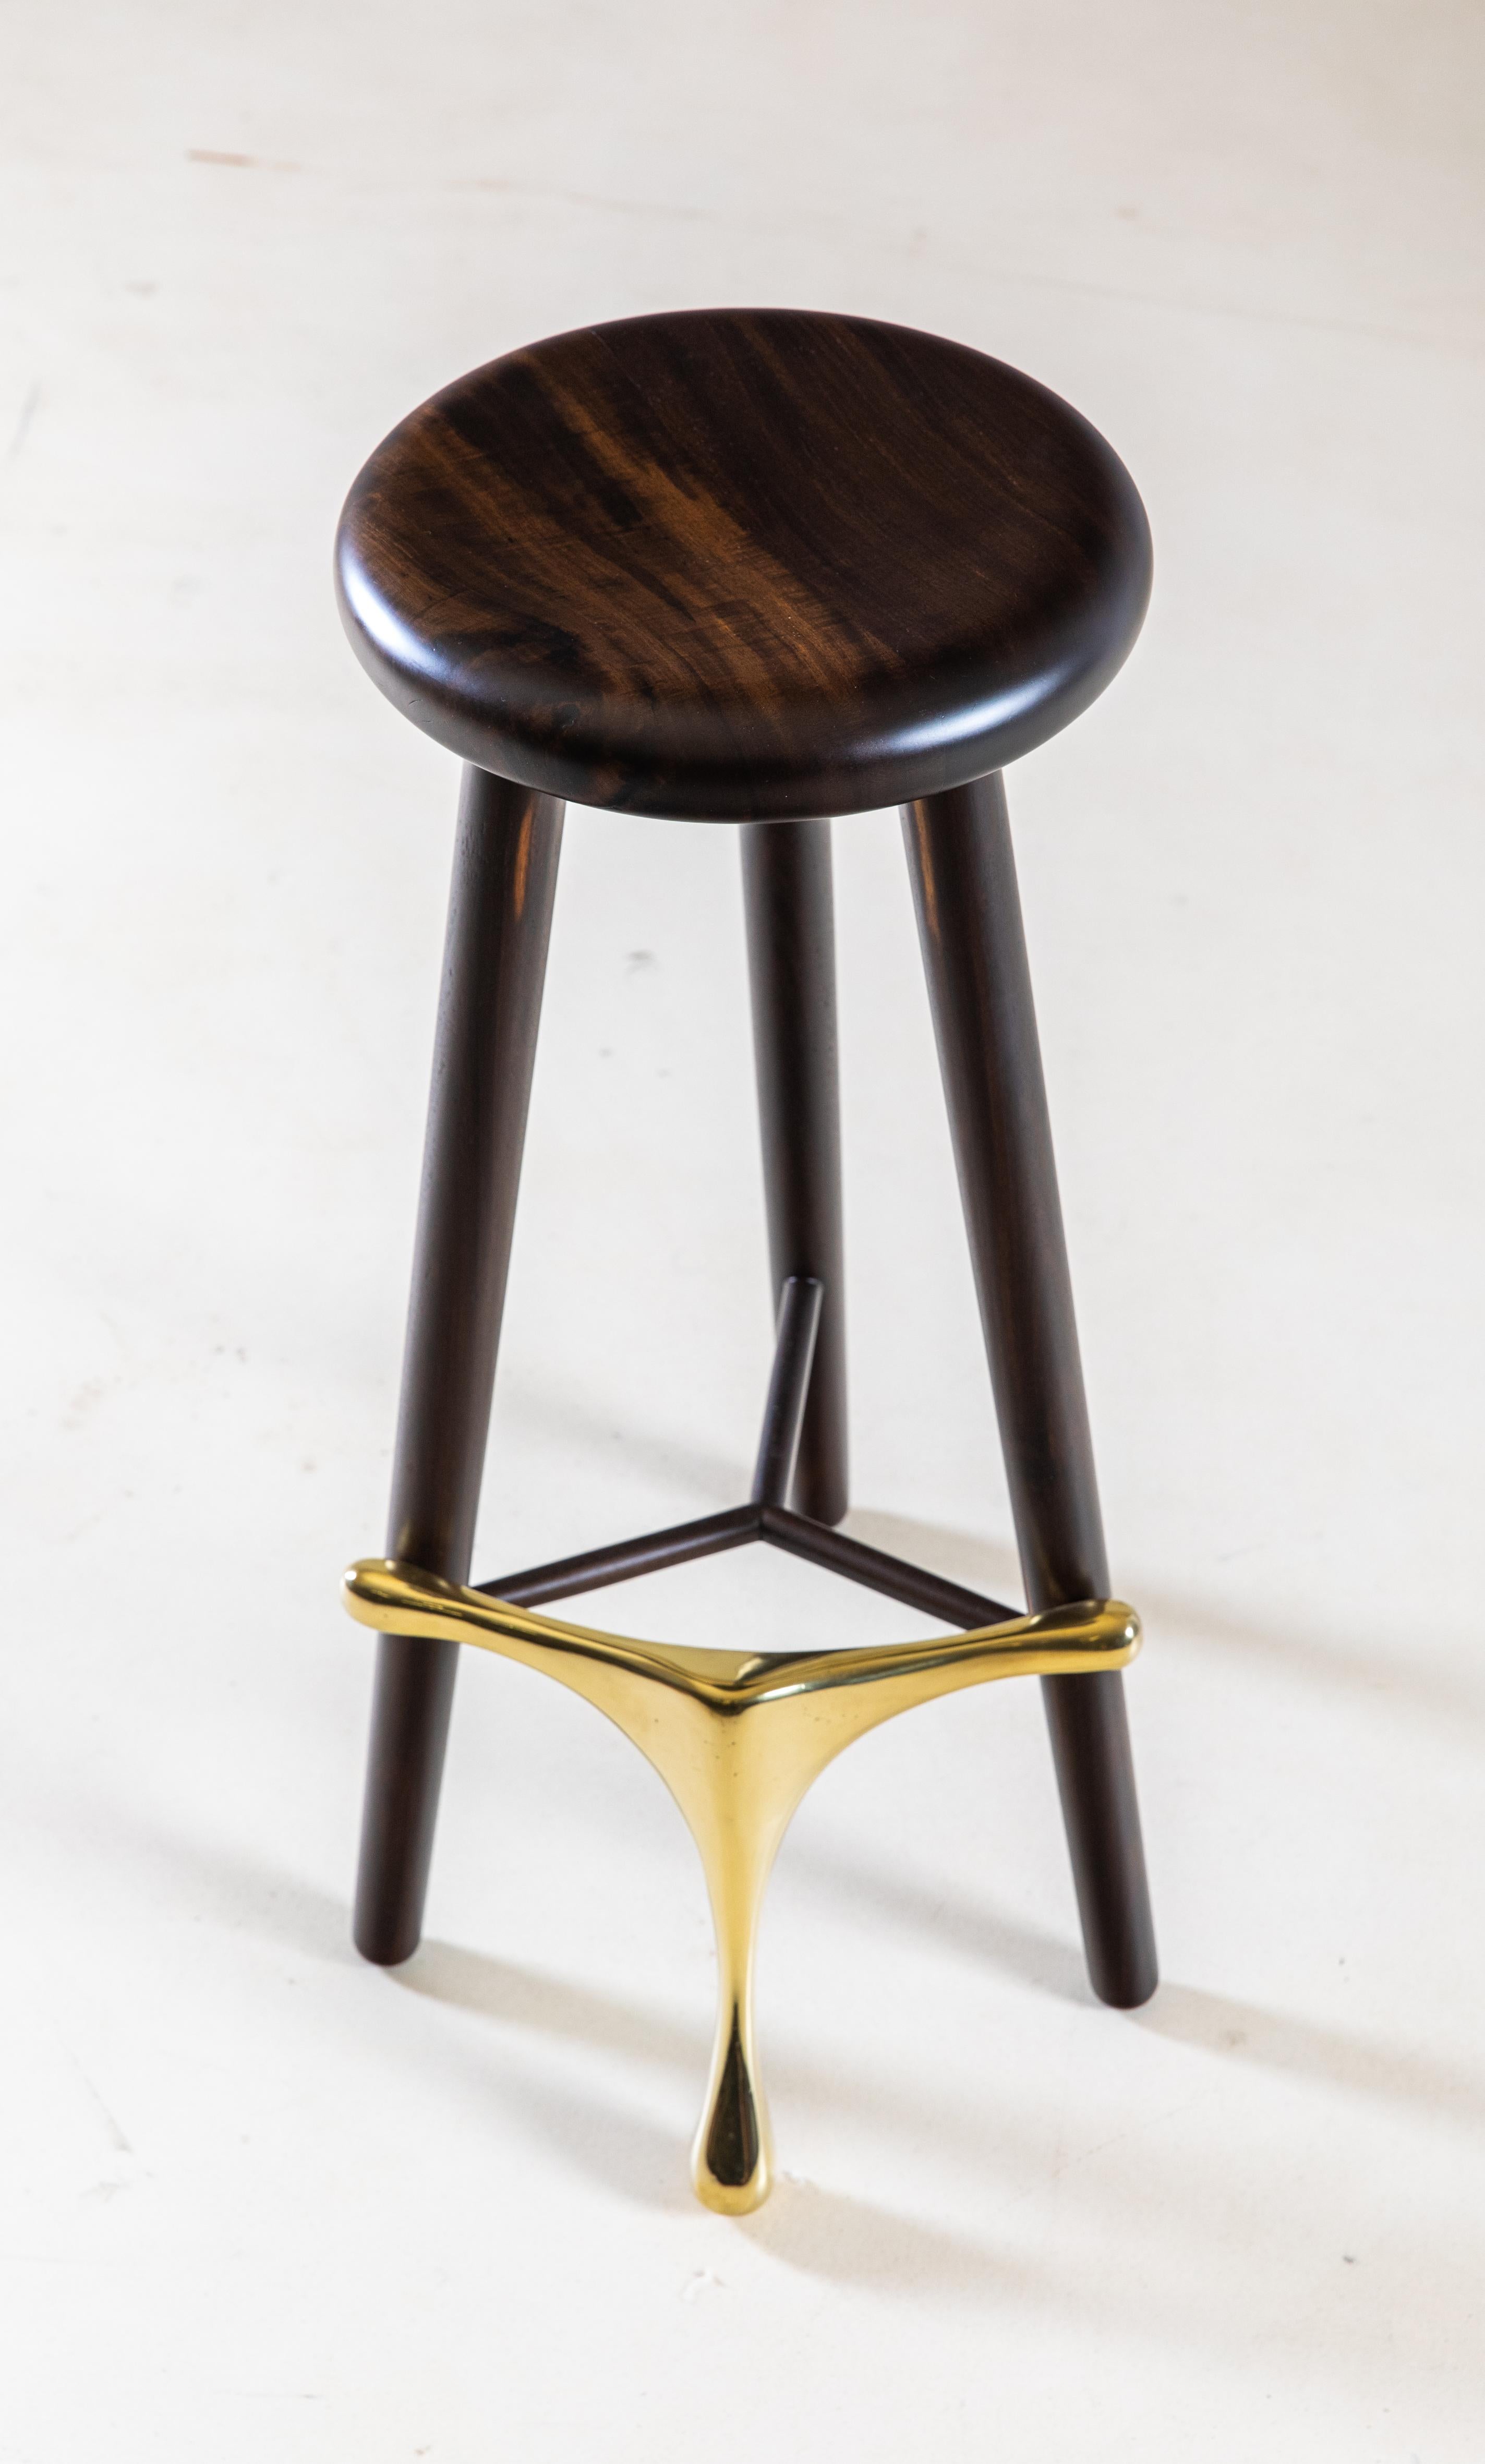 Amparo Braúna and Bronze Tall Stool by Alva Design
Materials: solid wood (Braúna) and cast bronze.
Dimensions: W 37 x D 48 x H 73 cm.

Available in different wood options (Braúna or Freijó solid wood) and footrest options (solid wood, iron or